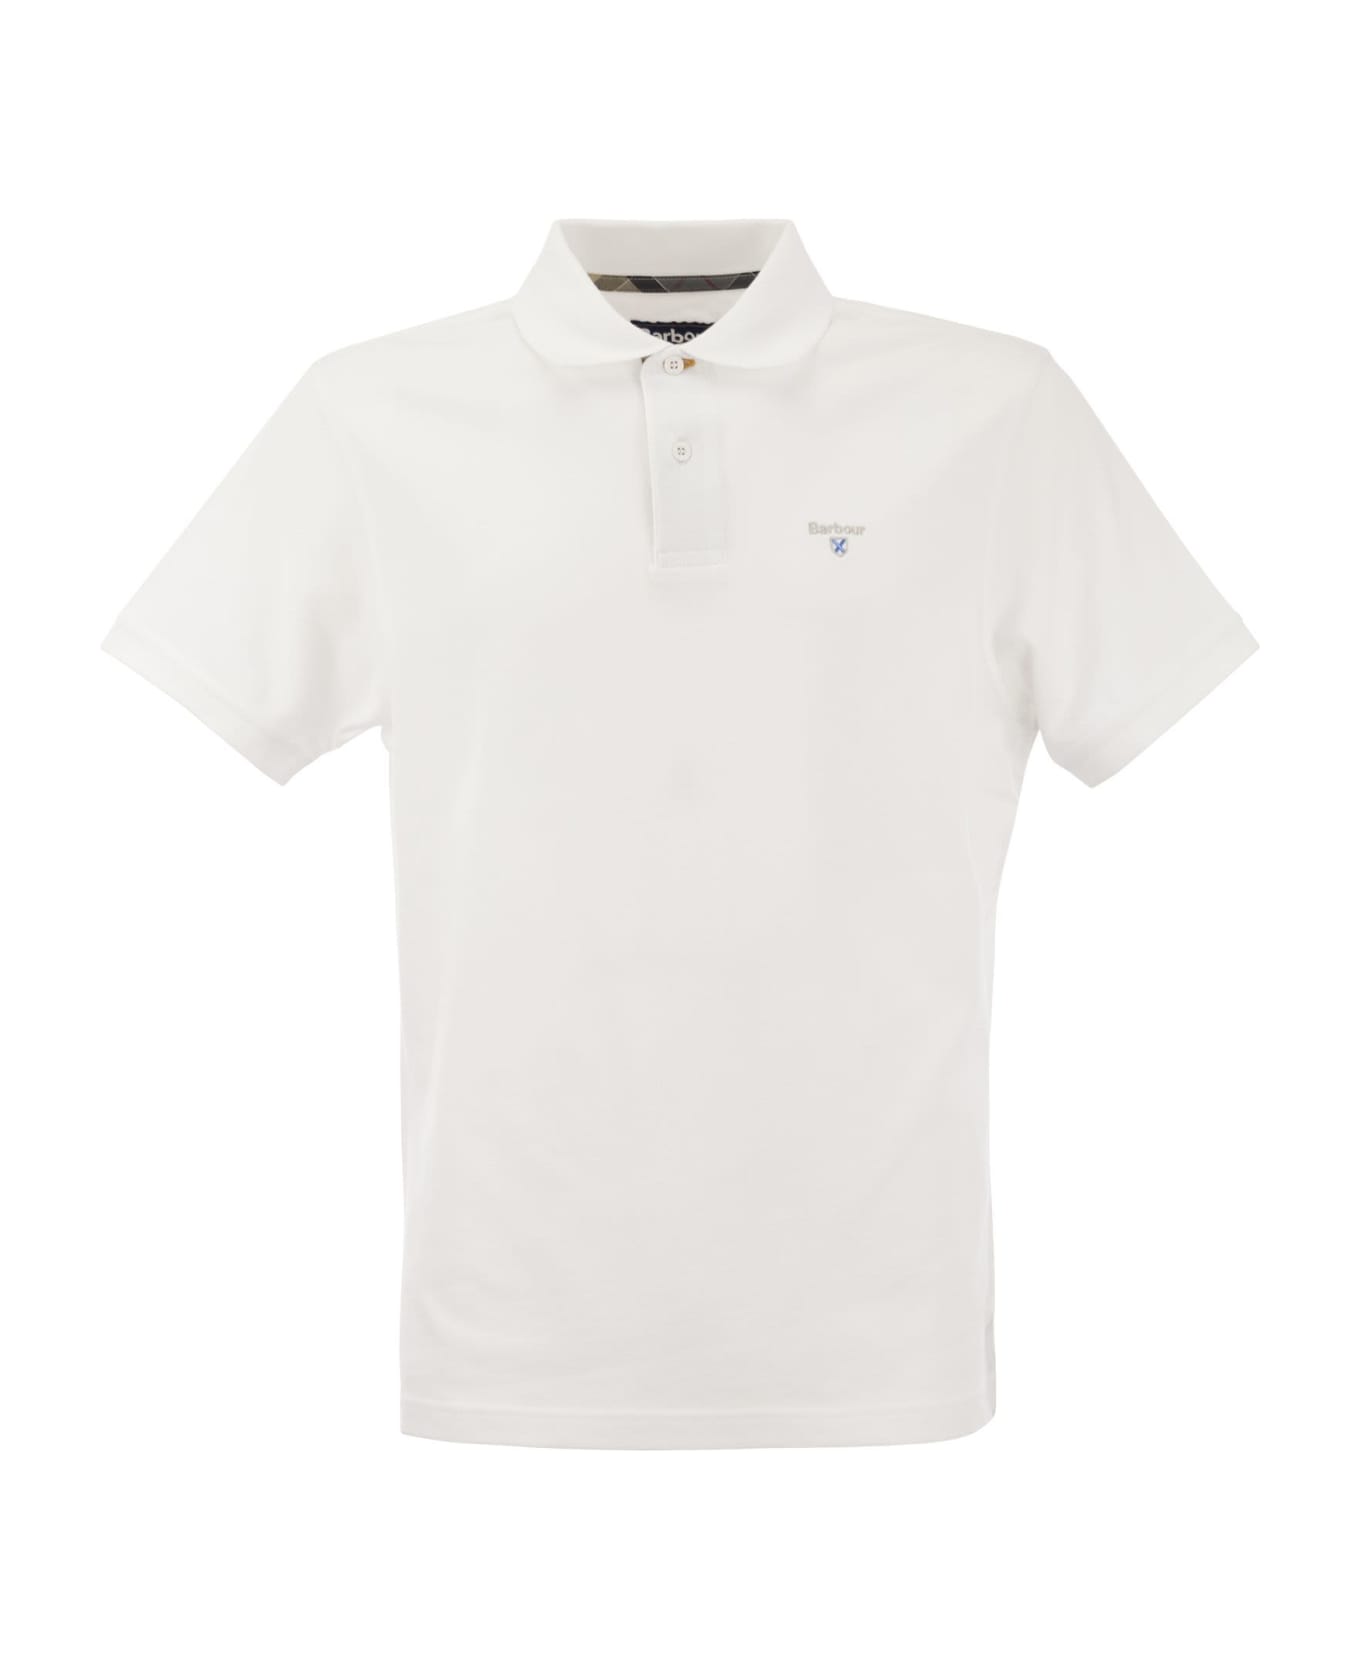 Barbour White Polo - White ポロシャツ